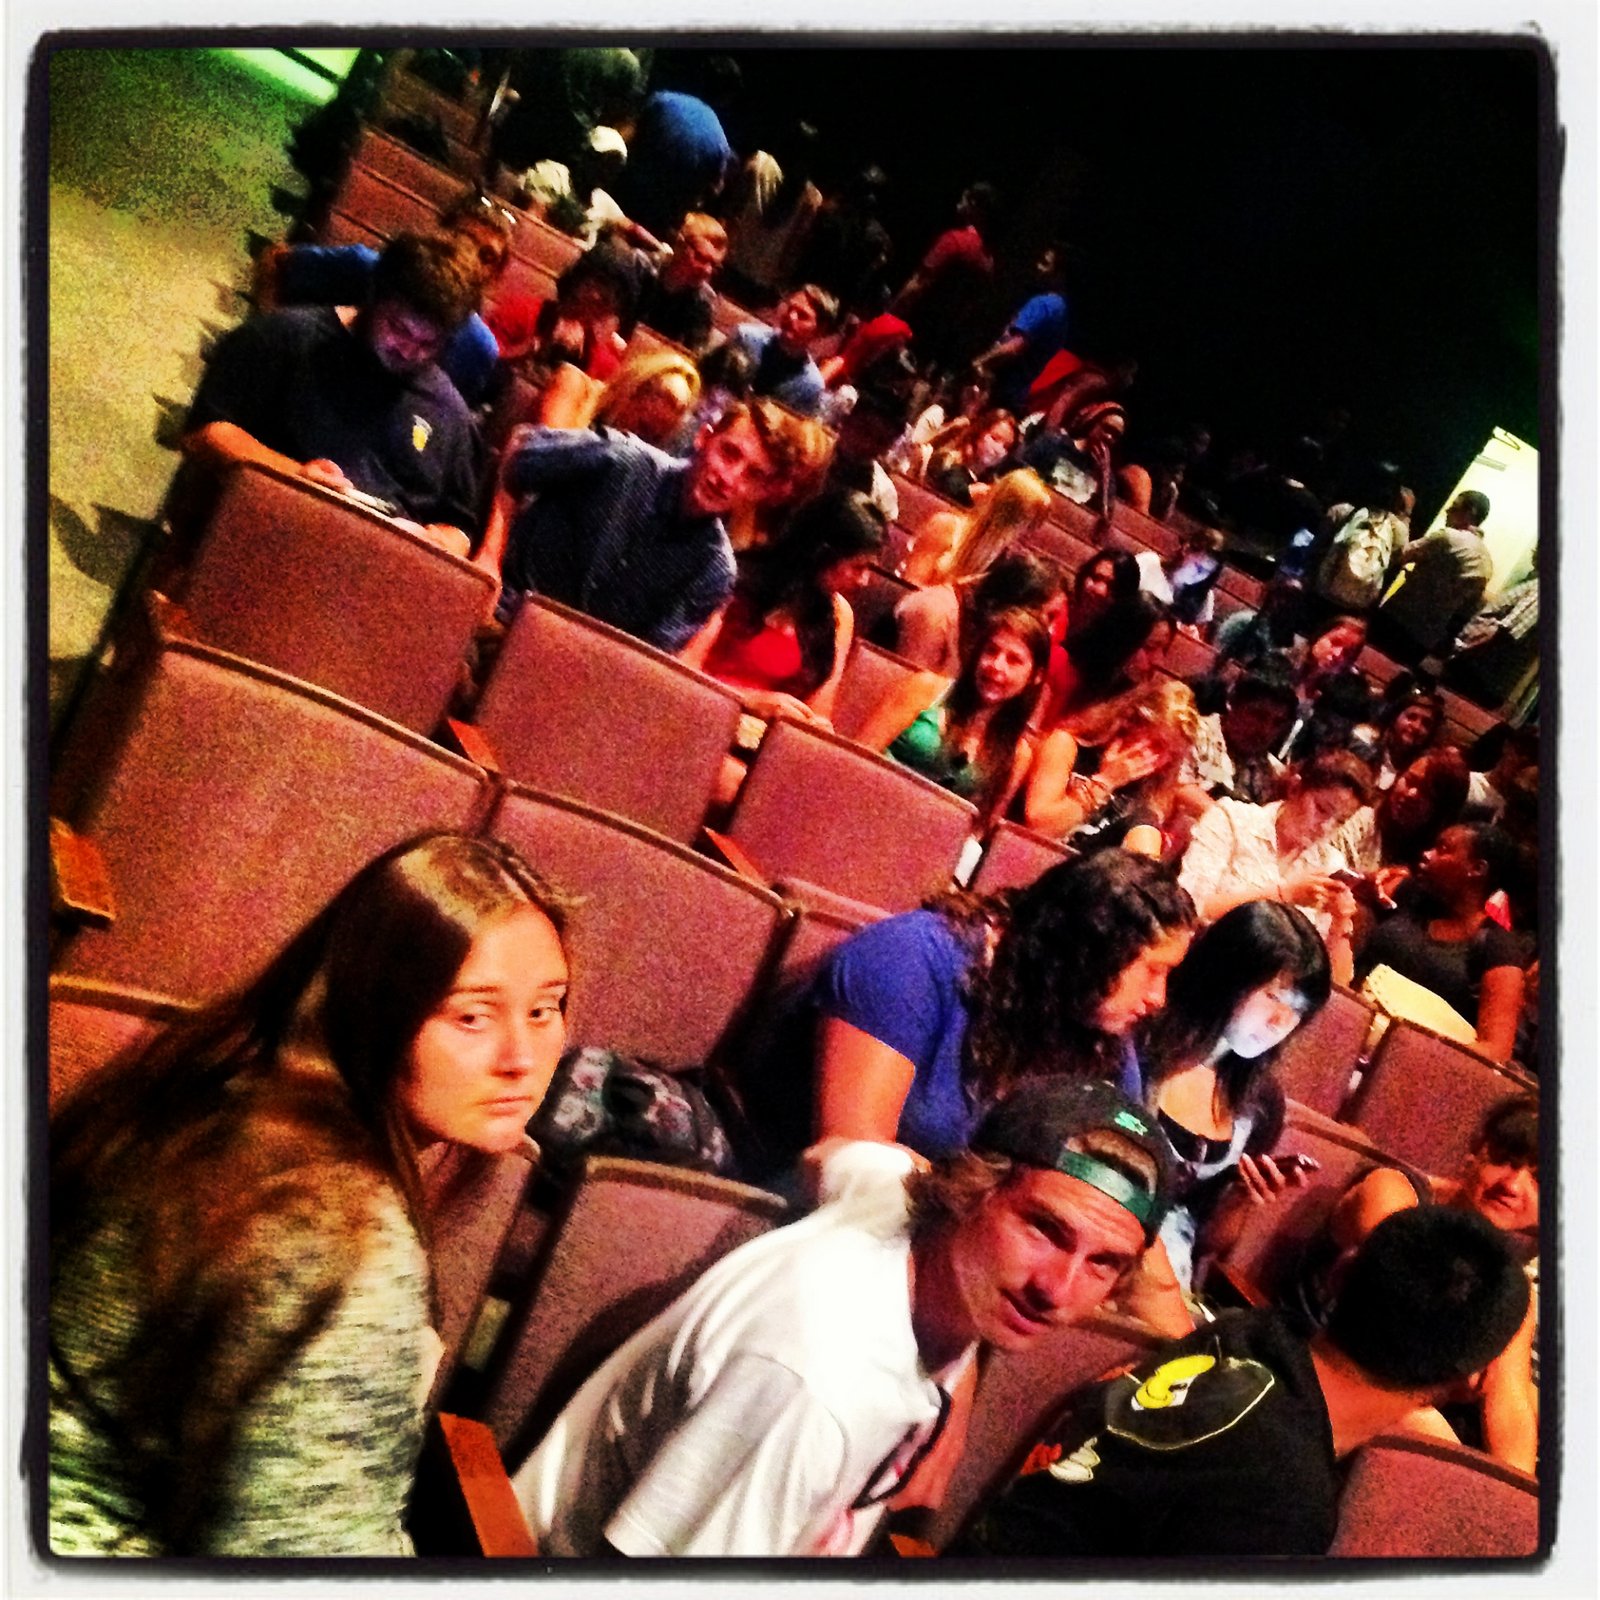 1st day of class in the University Theater at CSULB